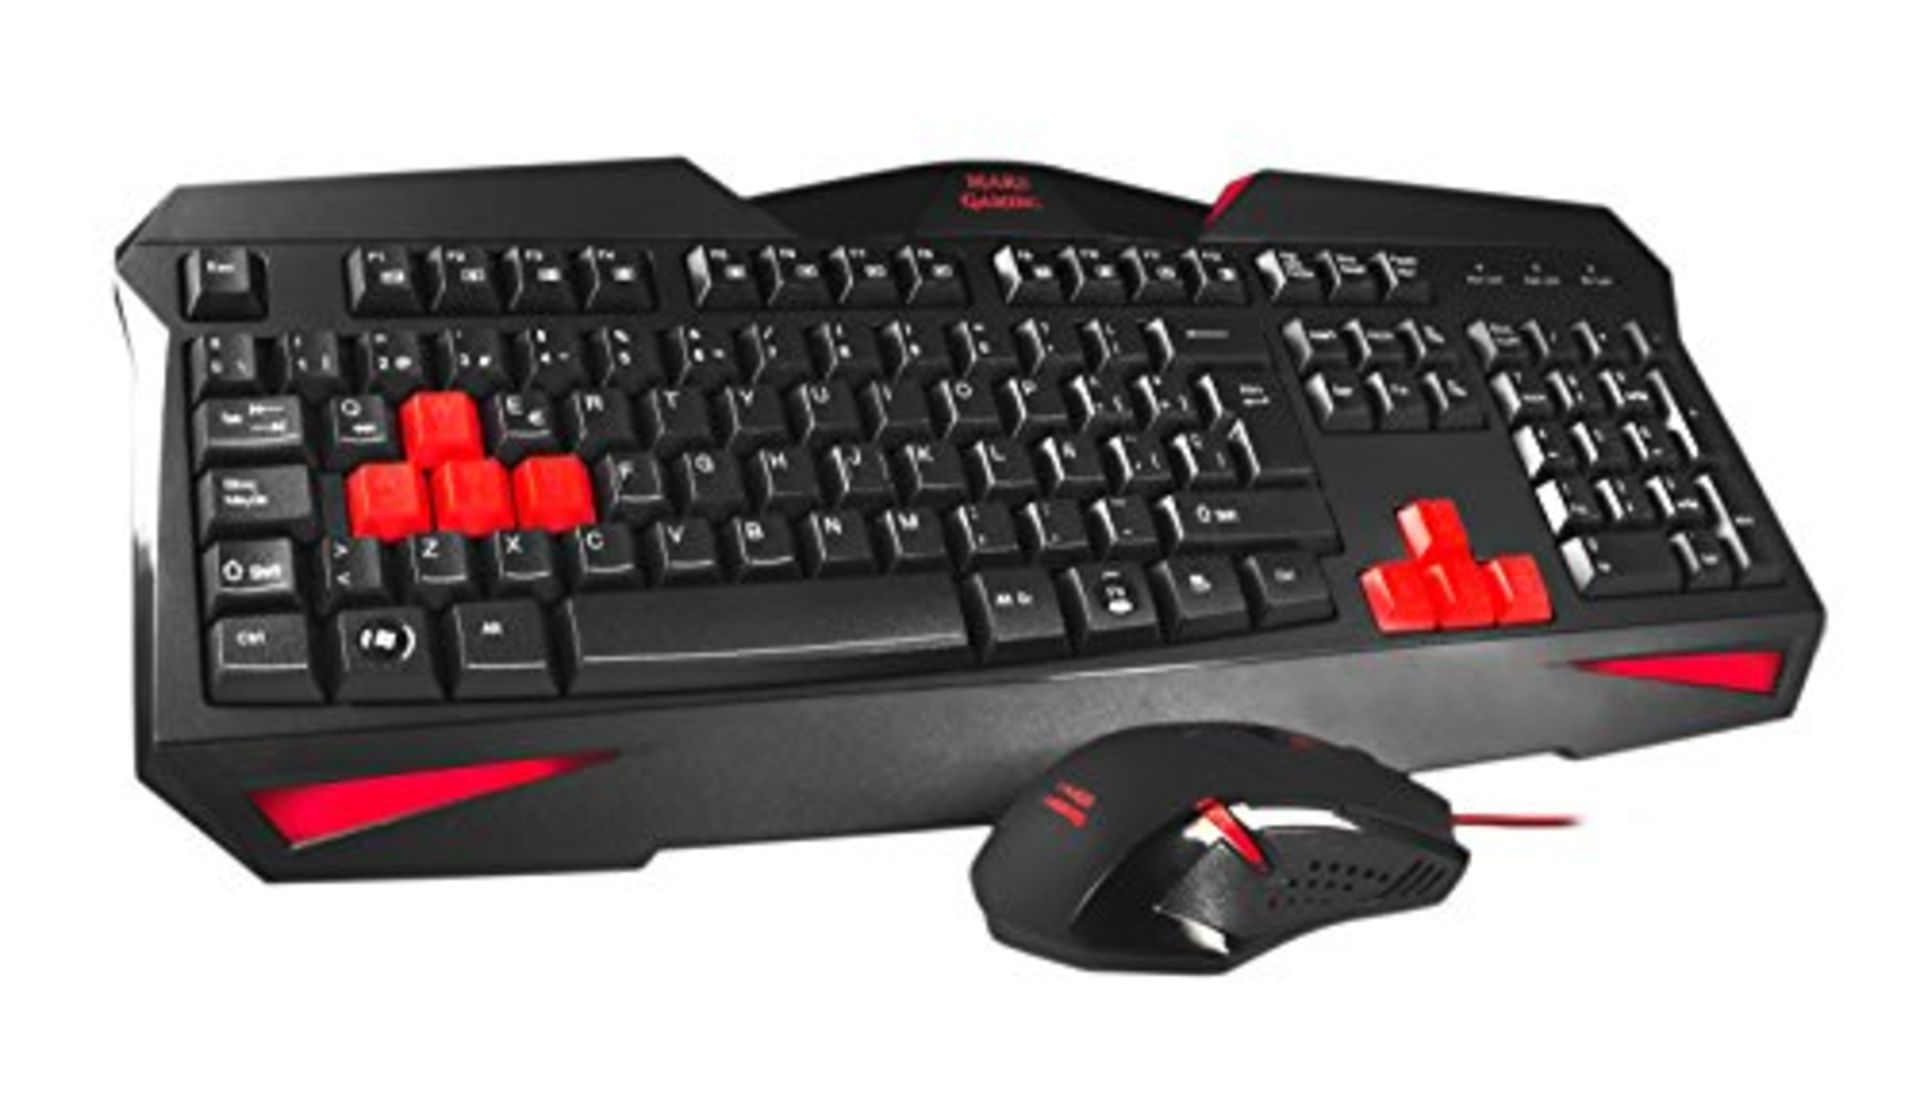 [INCOMPLETE] Mars Gaming MCP1 - Gaming Keyboard and Mouse Pack (2800 DPI, Anti-Ghostin